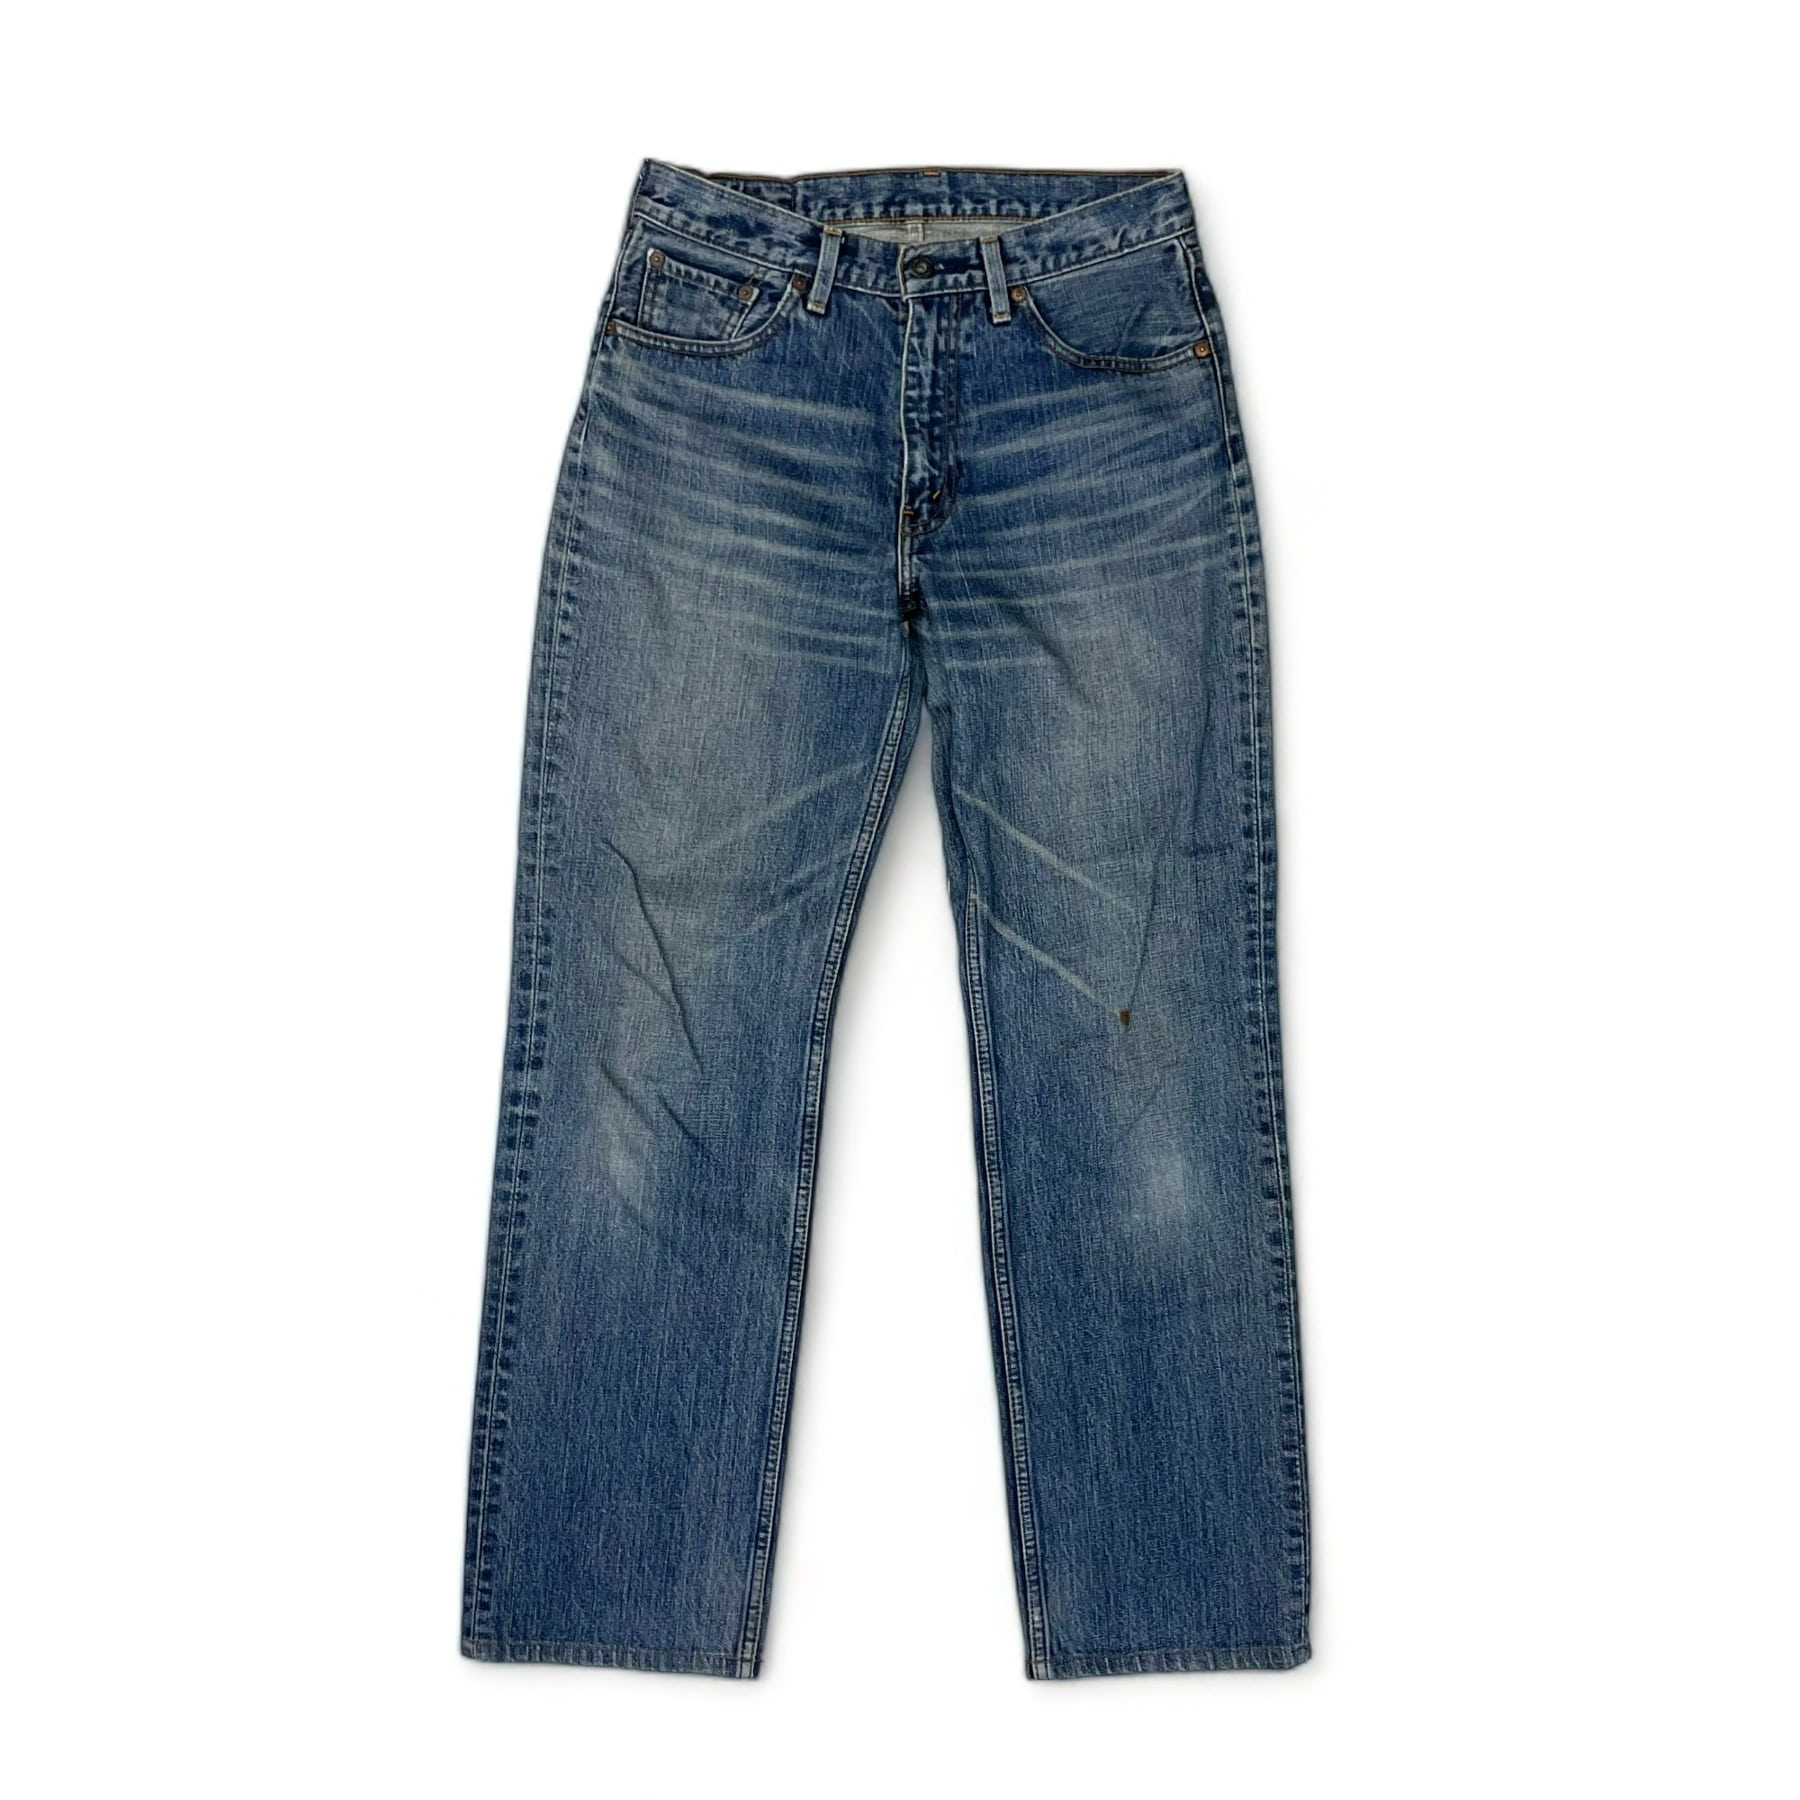 00&#039;s Levis 502 - 30inch